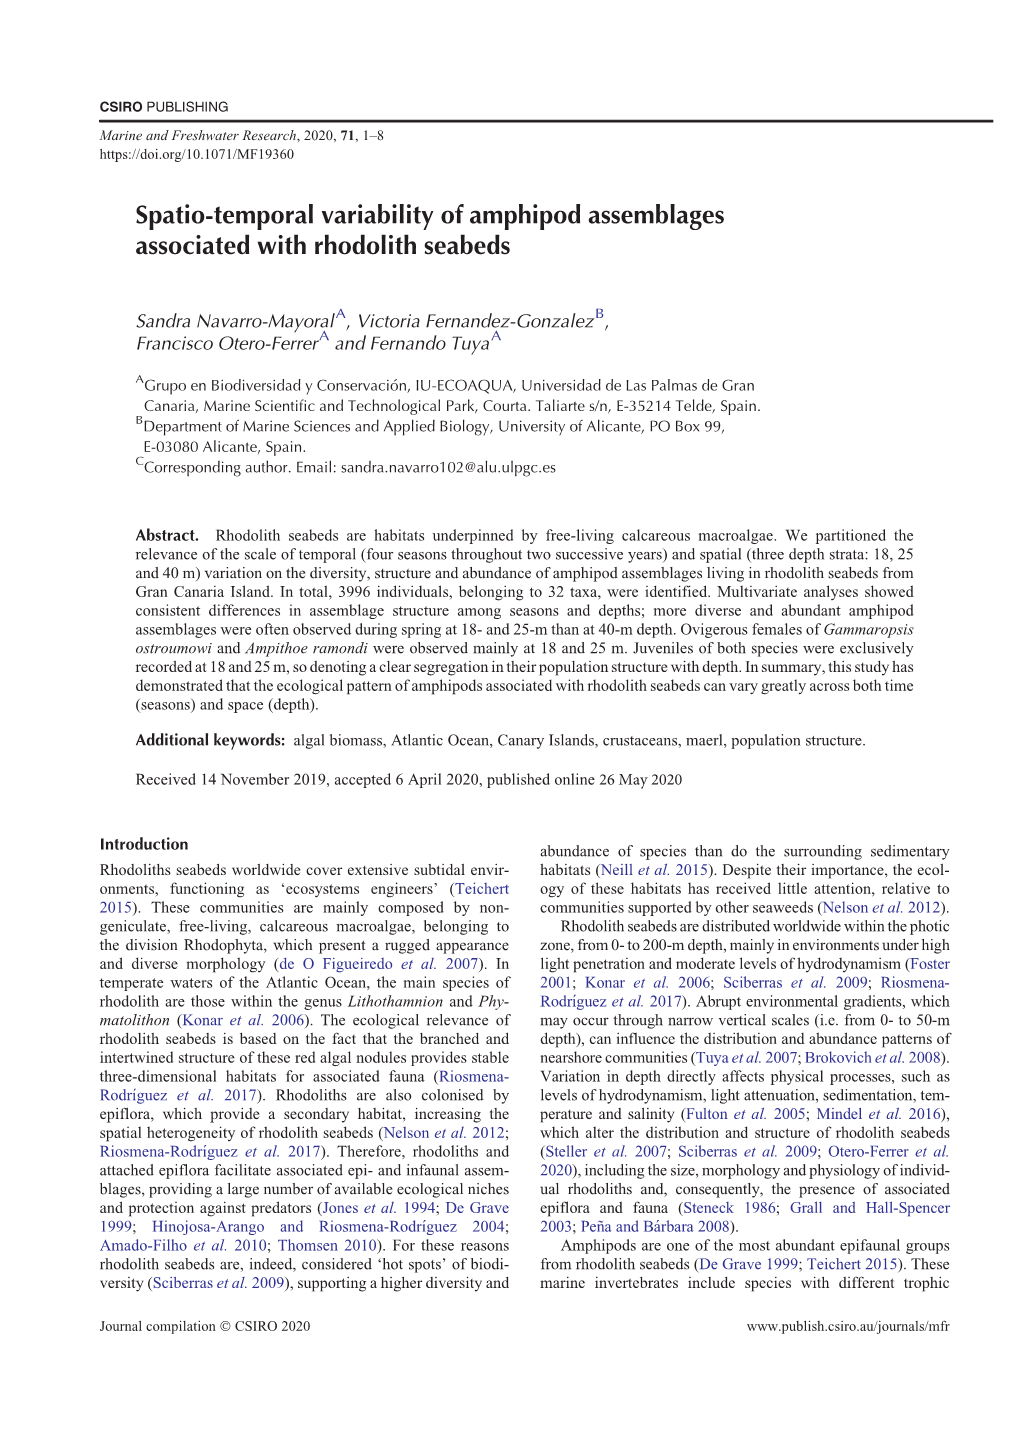 Spatio-Temporal Variability of Amphipod Assemblages Associated with Rhodolith Seabeds